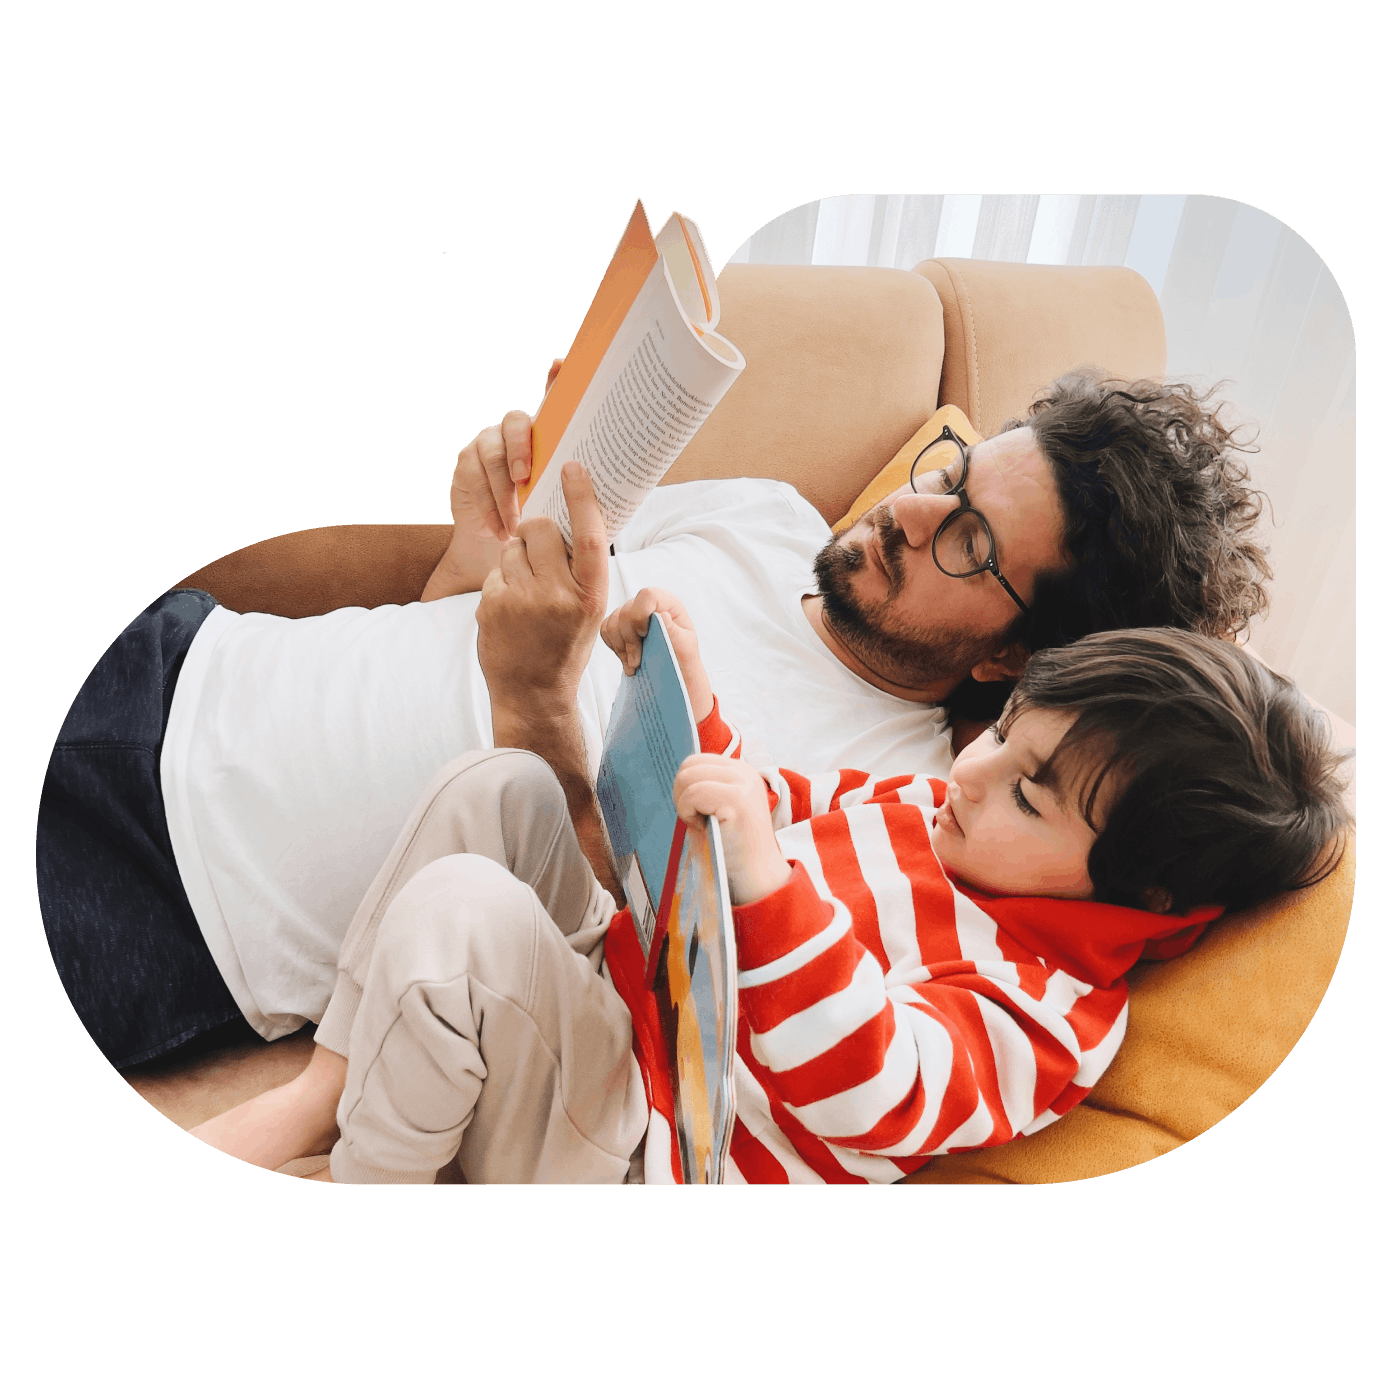 In the image, a father and child can be seen deeply immersed in reading, enjoying the moment together.